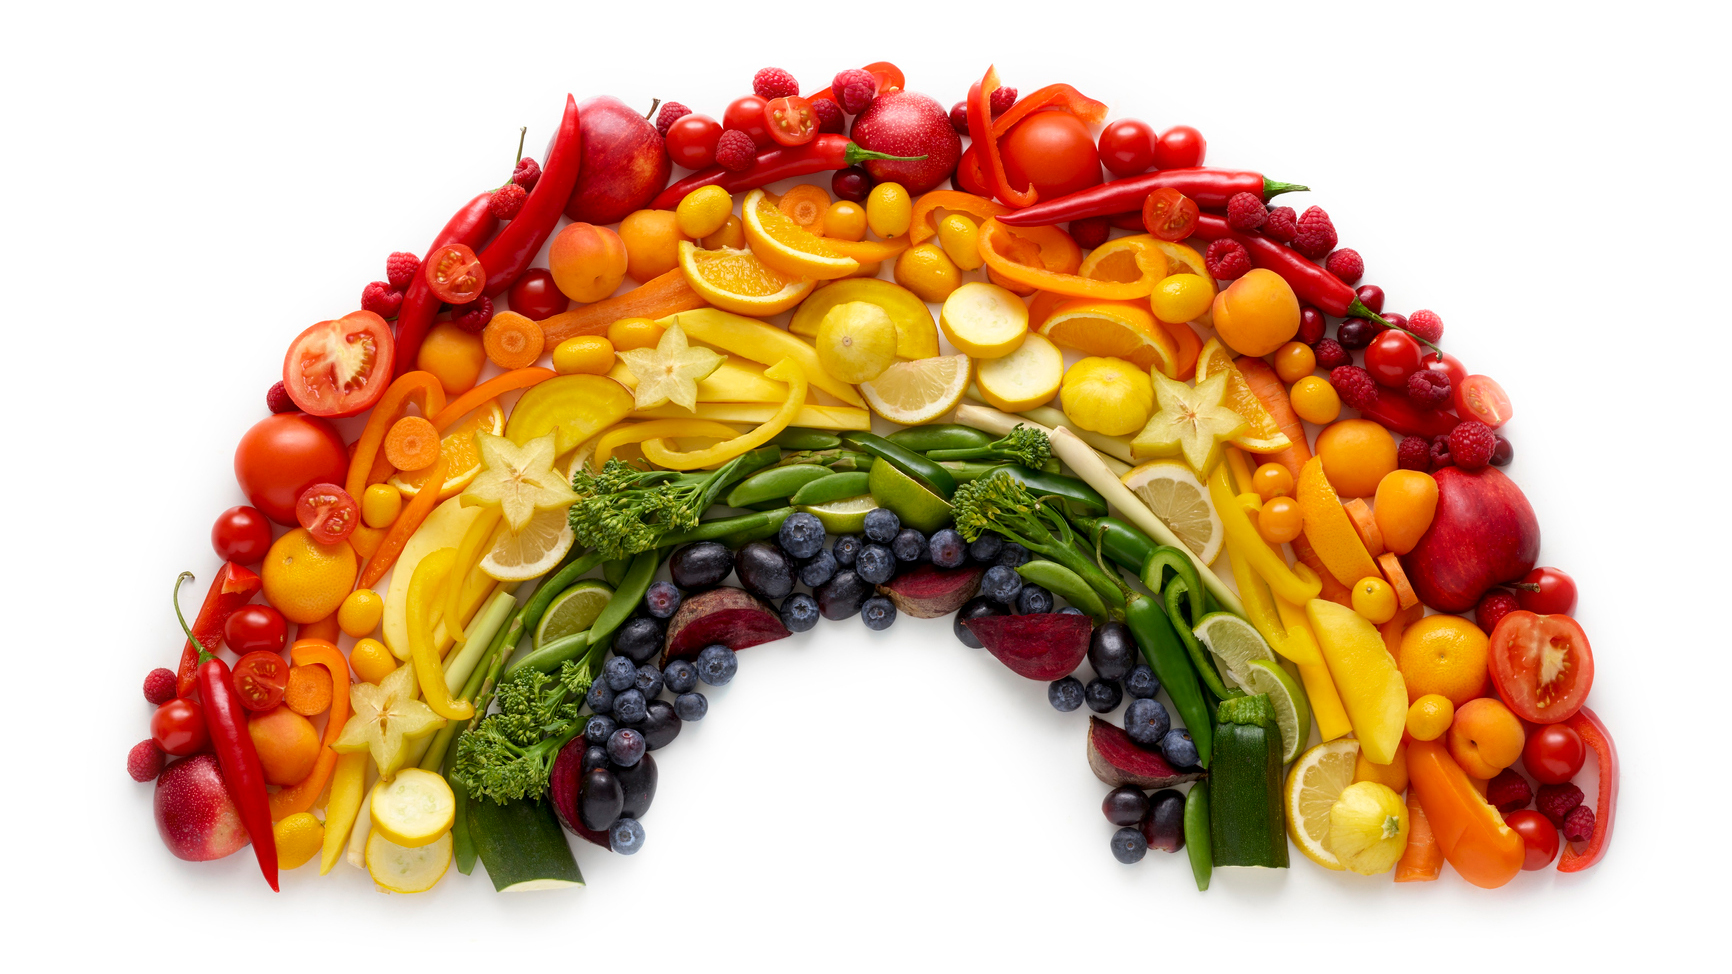 fresh fruits and veggies arranged into a rainbow made of food